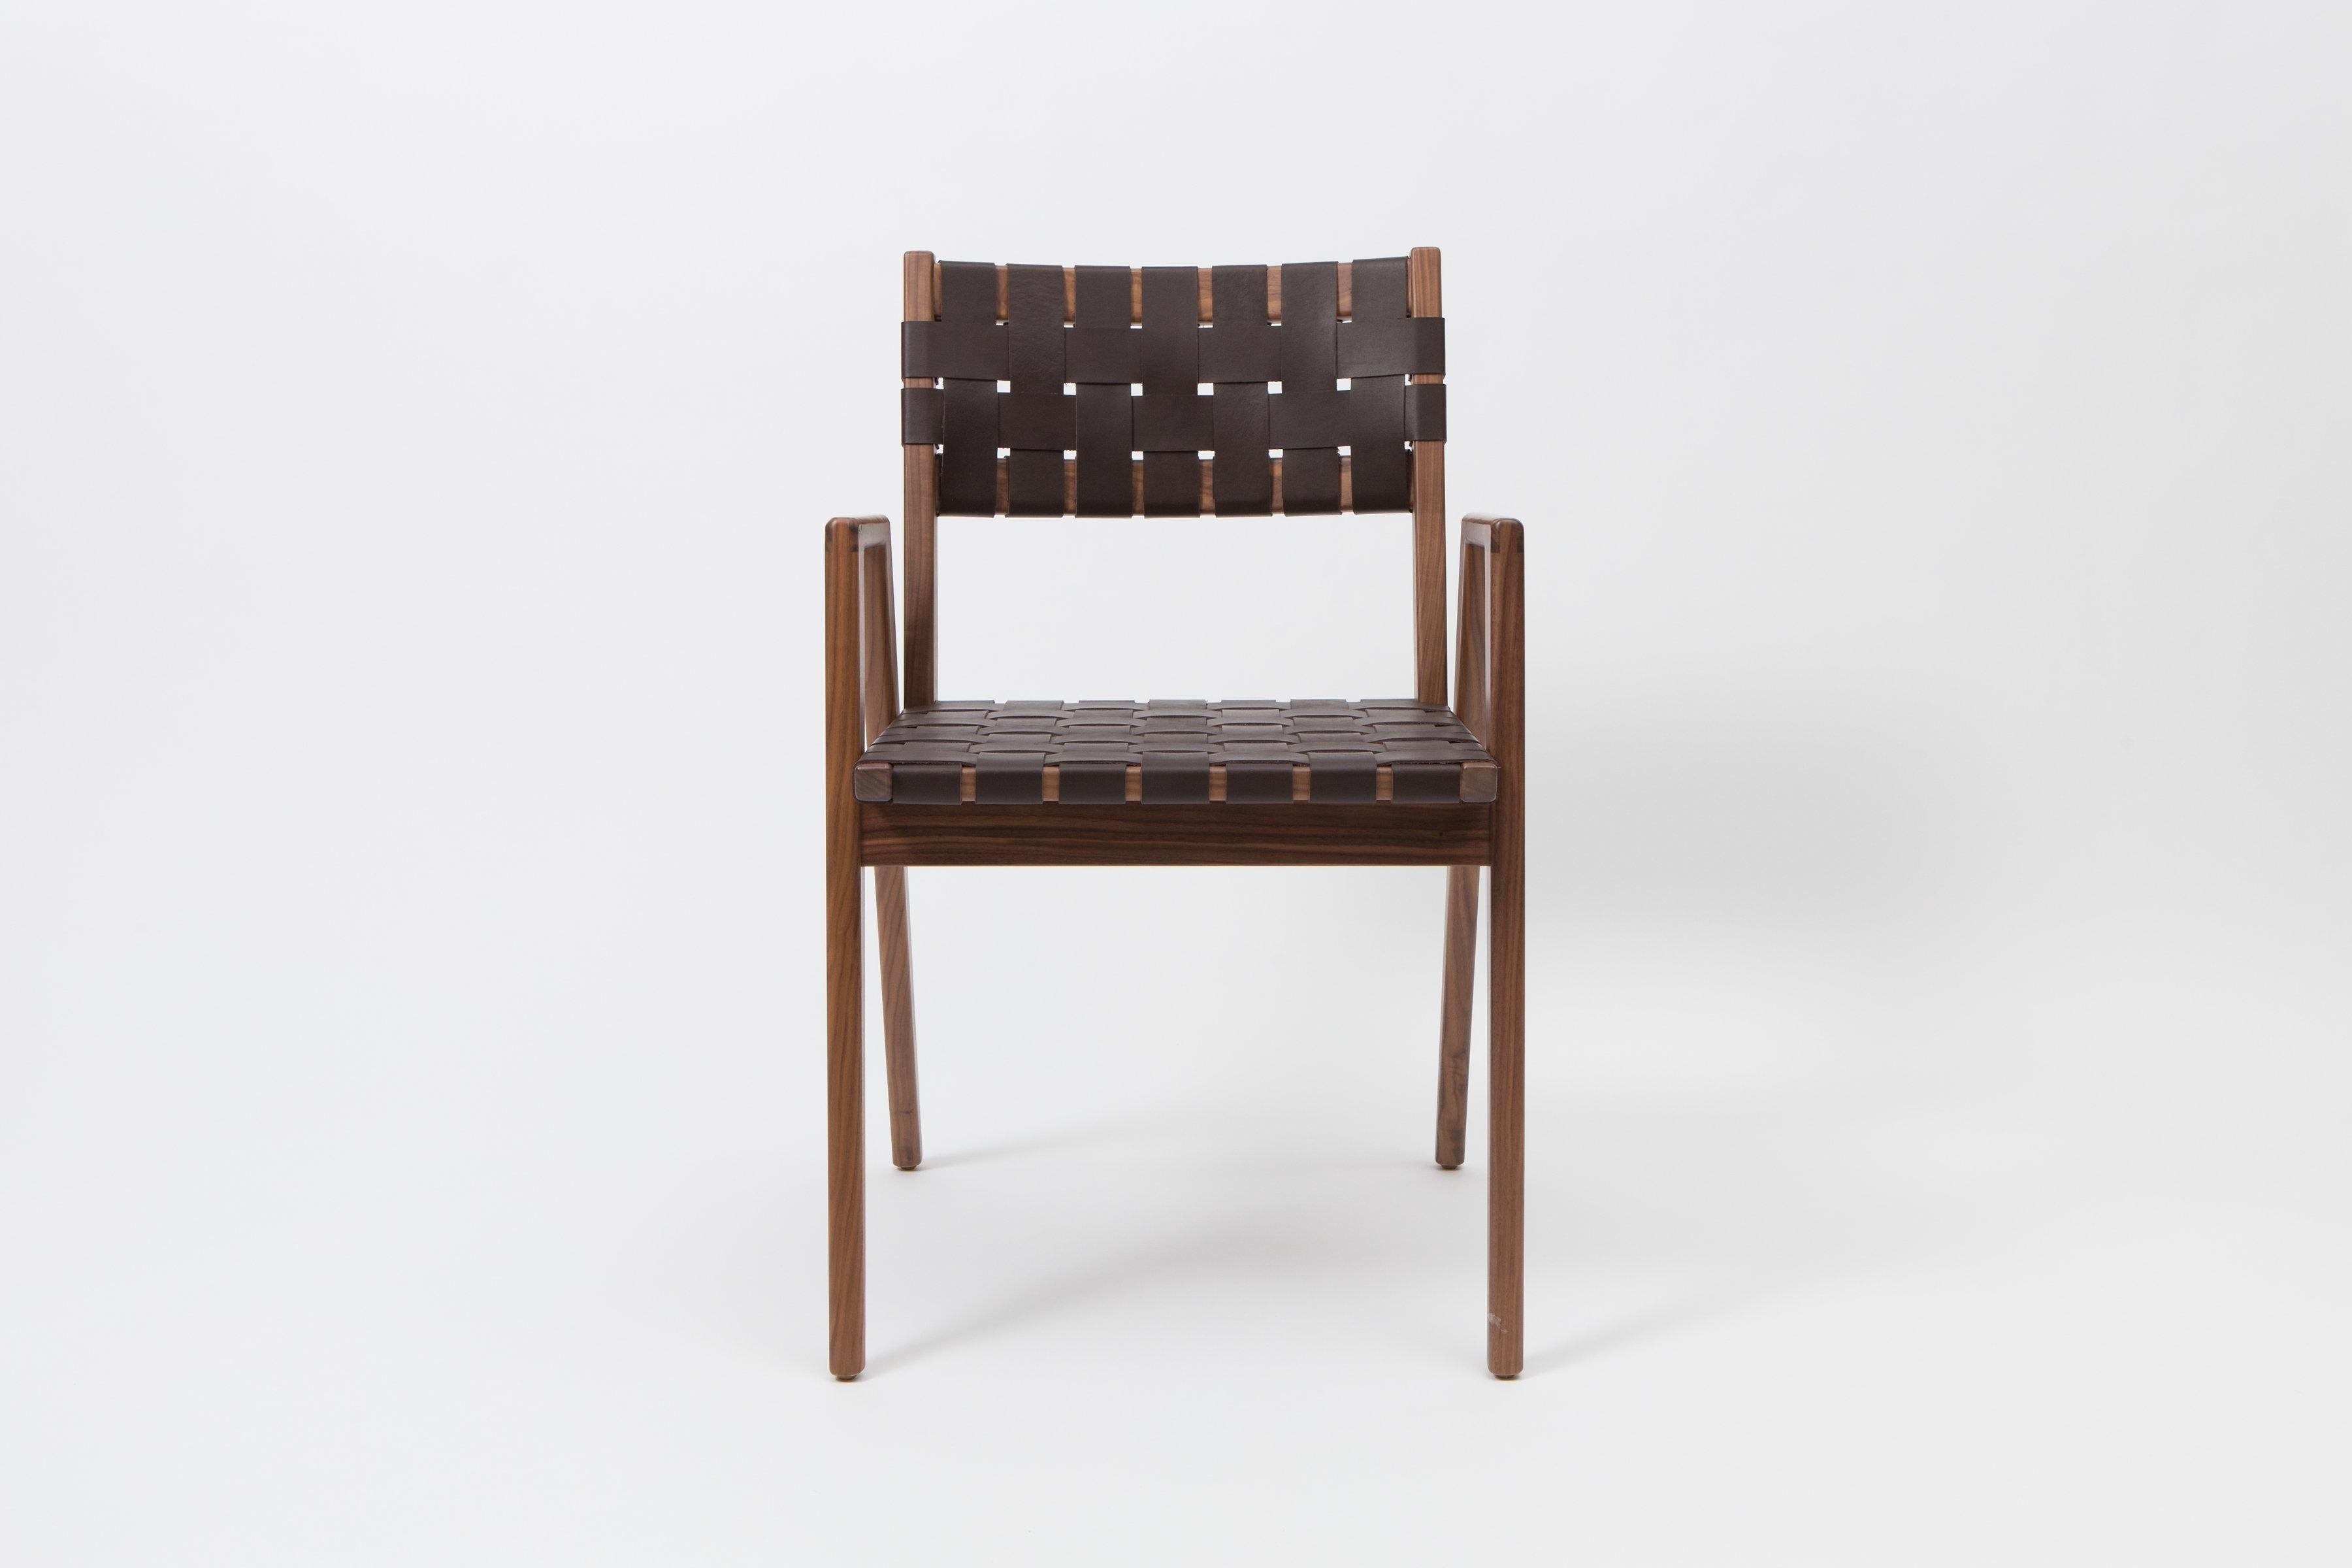 Originally designed by Mel Smilow in 1956 and officially reintroduced by his daughter Judy Smilow in 2016, the woven leather dining armchair is classically midcentury. The simplistic beauty, fine craftsmanship, and exceptional detail is present from